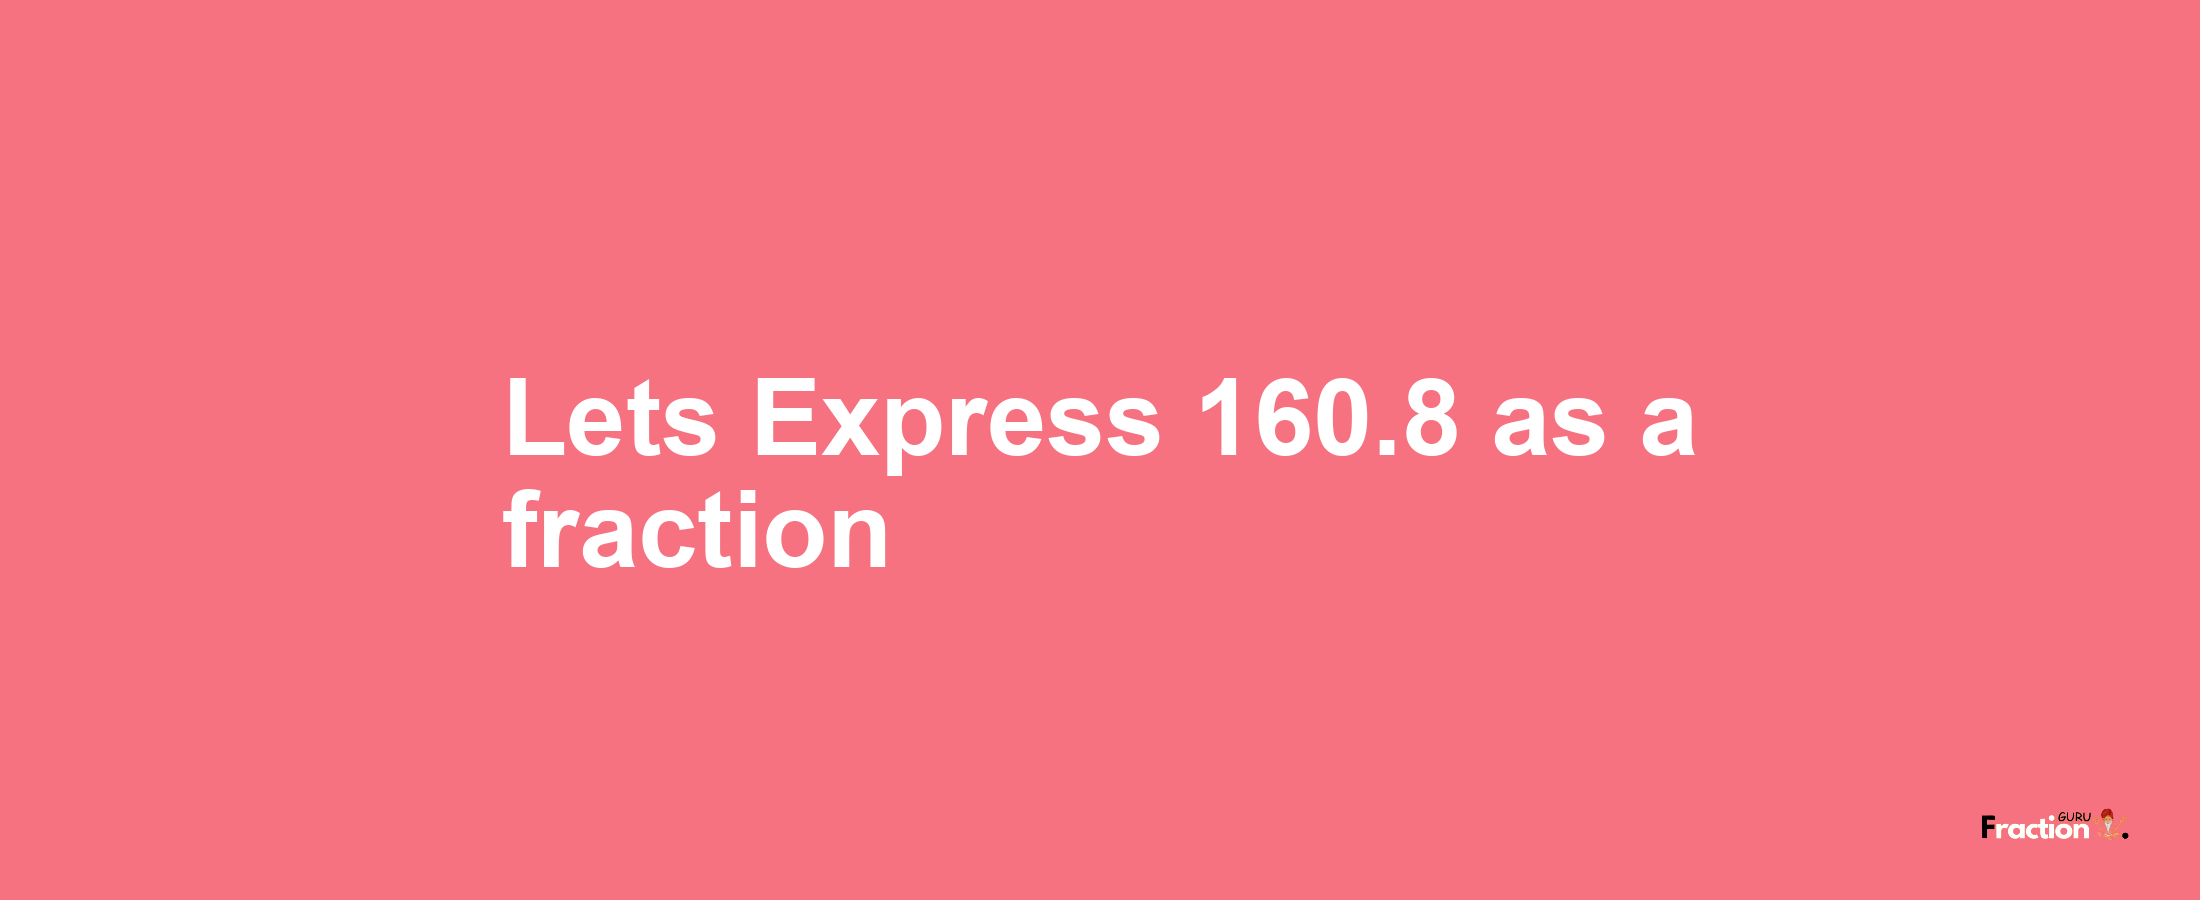 Lets Express 160.8 as afraction